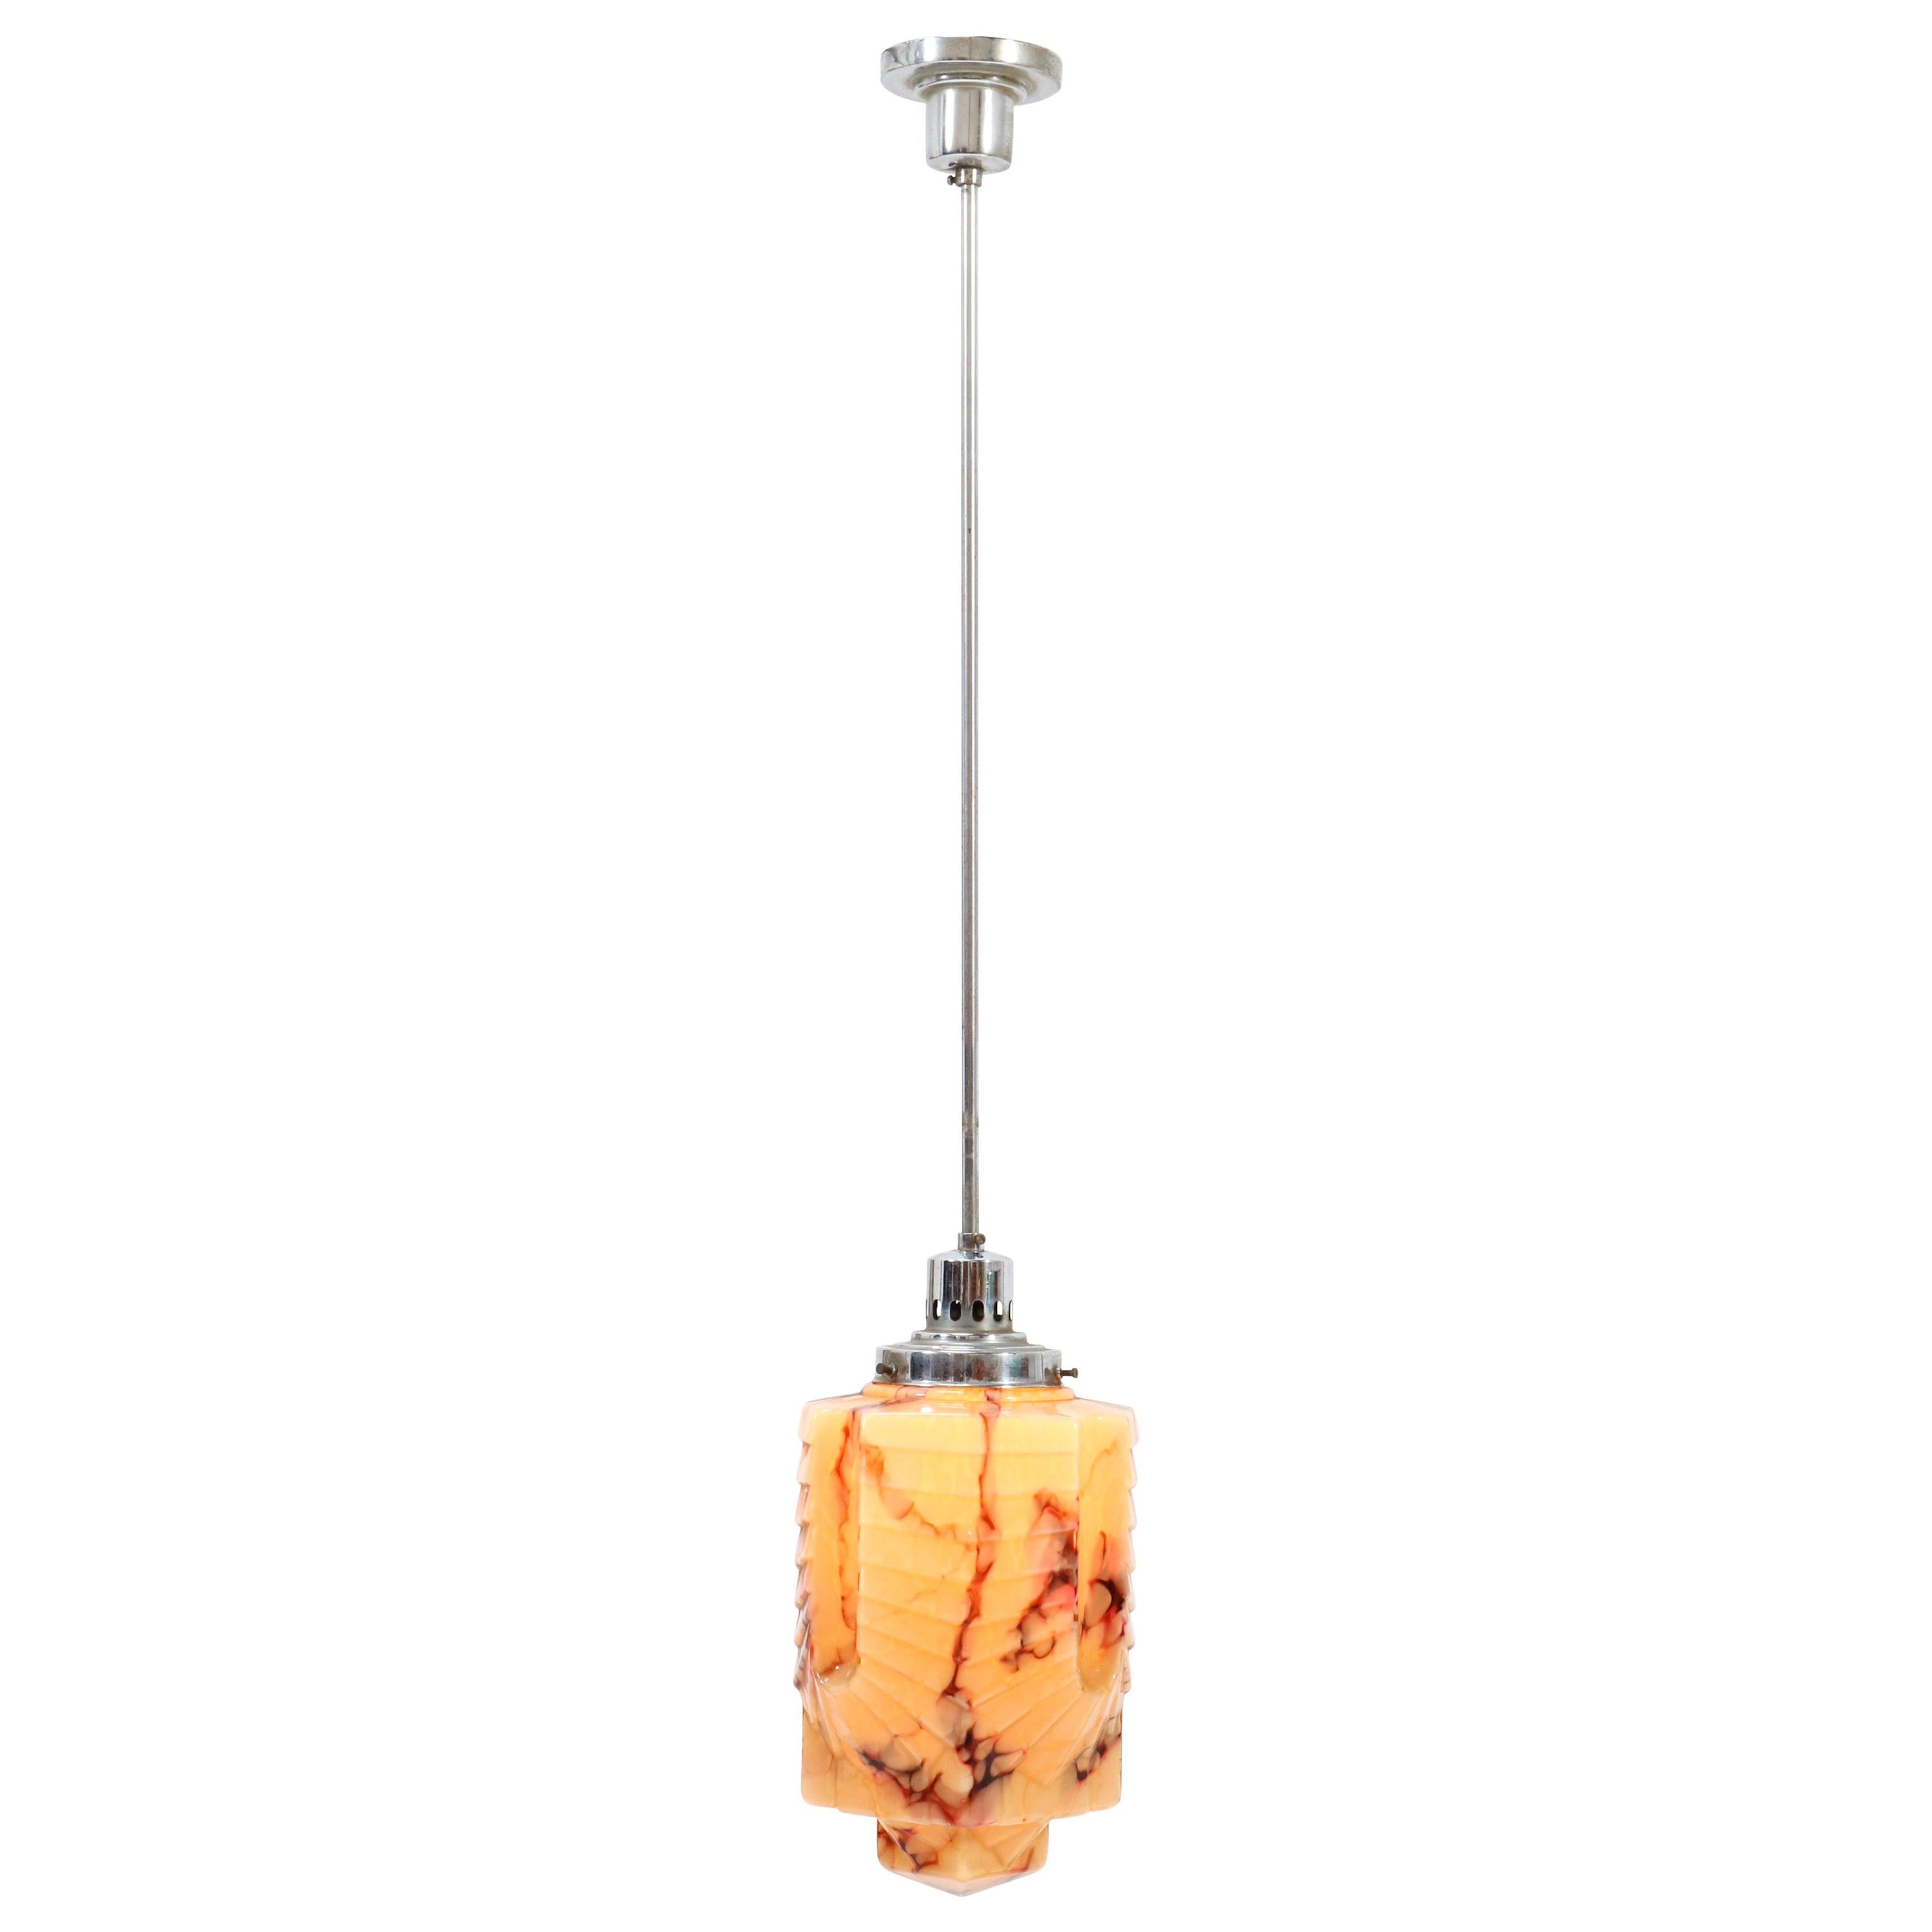 French Nickel-Plated Brass Art Deco Pendant Light, 1930s For Sale